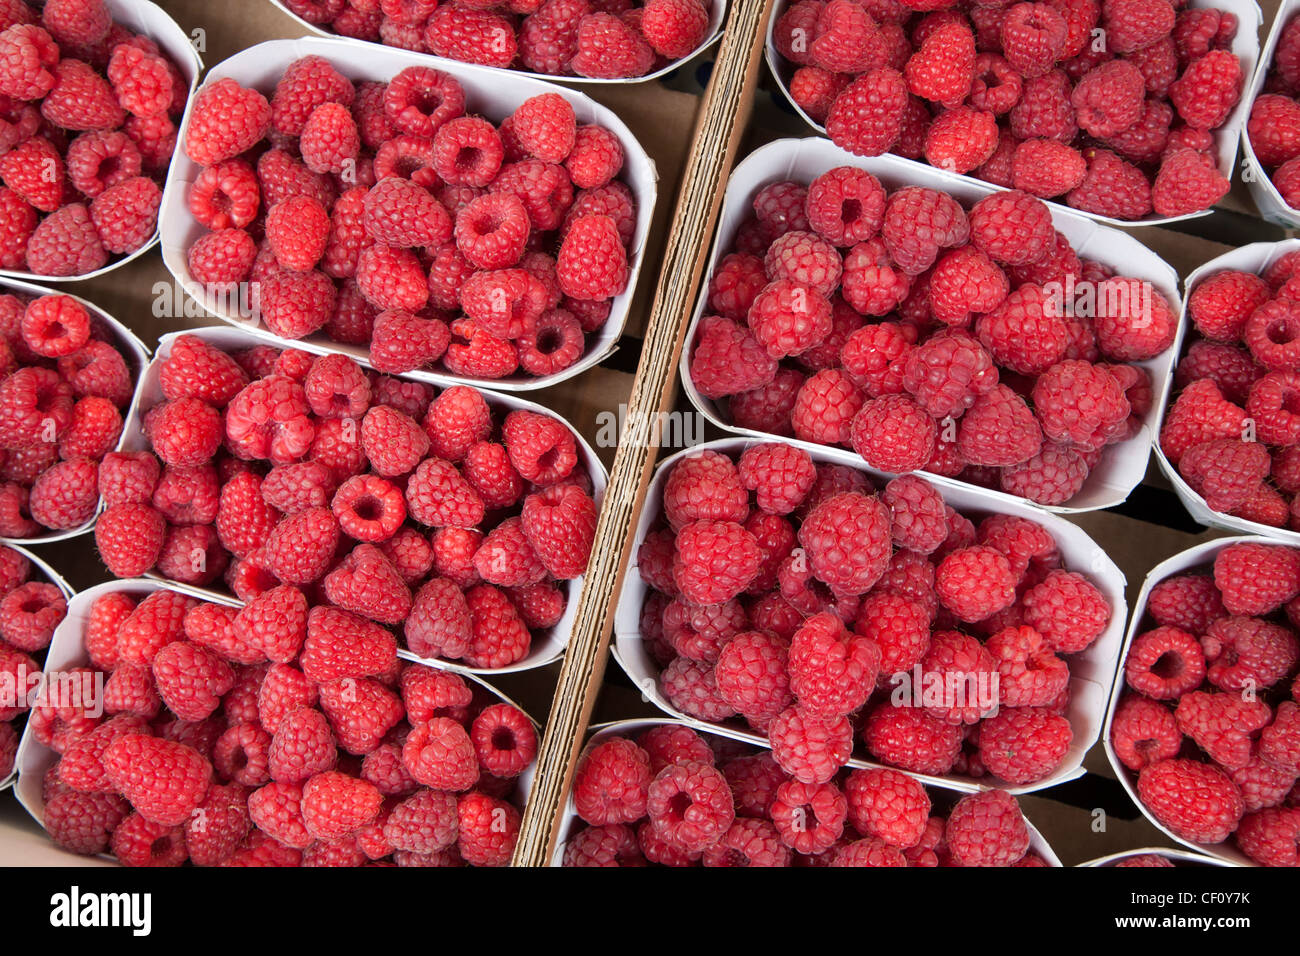 Baskets of raspberries at a market stall Stock Photo